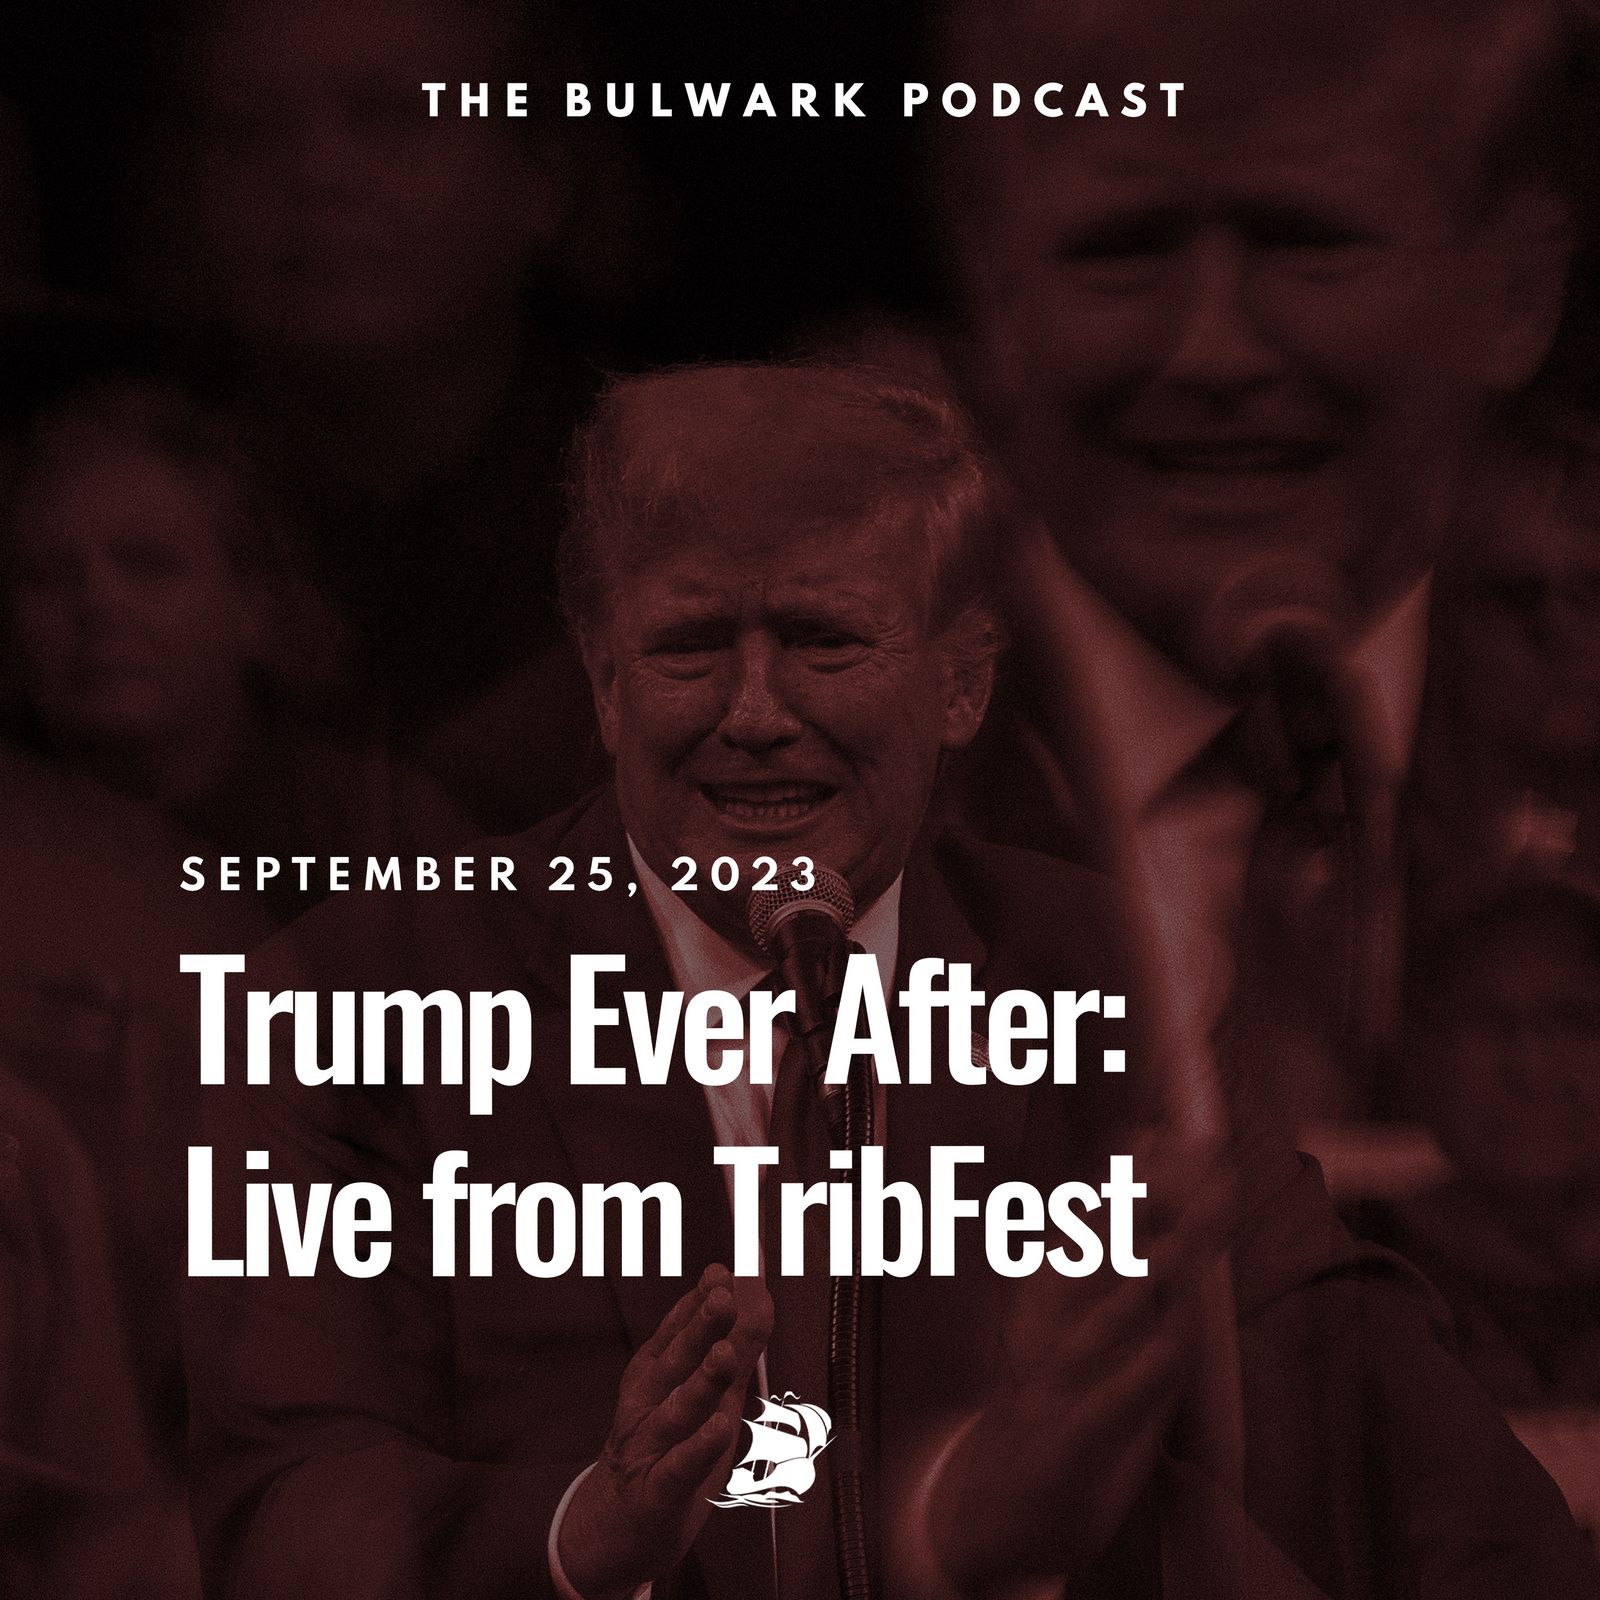 Trump Ever After: Live from TribFest by The Bulwark Podcast